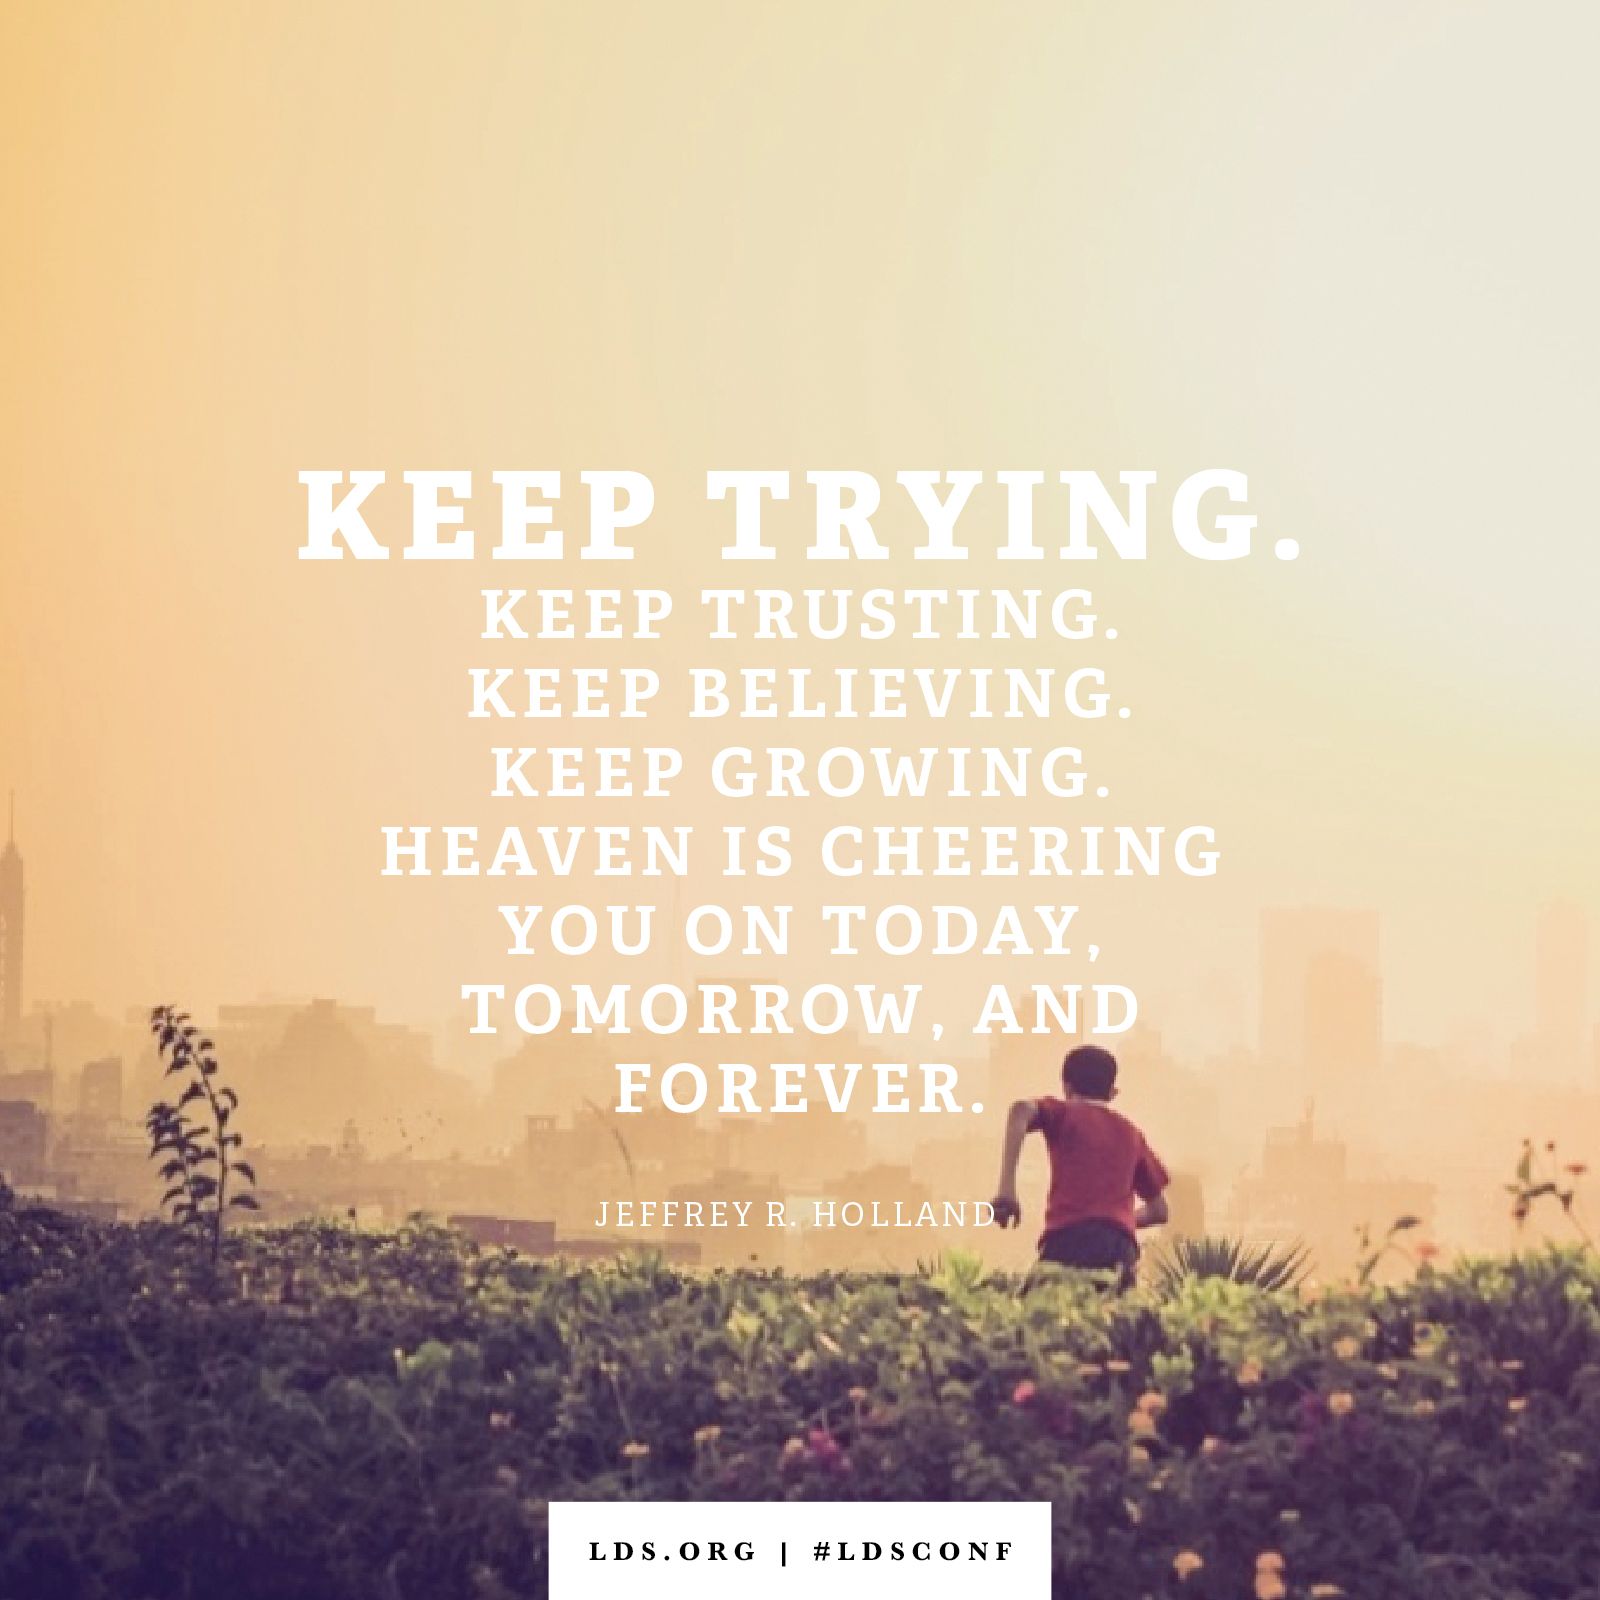 “Keep trying. Keep trusting. Keep believing. Keep growing. Heaven will be cheering you on today, tomorrow, and forever.” —Elder Jeffrey R. Holland, “Tomorrow the Lord Will Do Wonders among You”